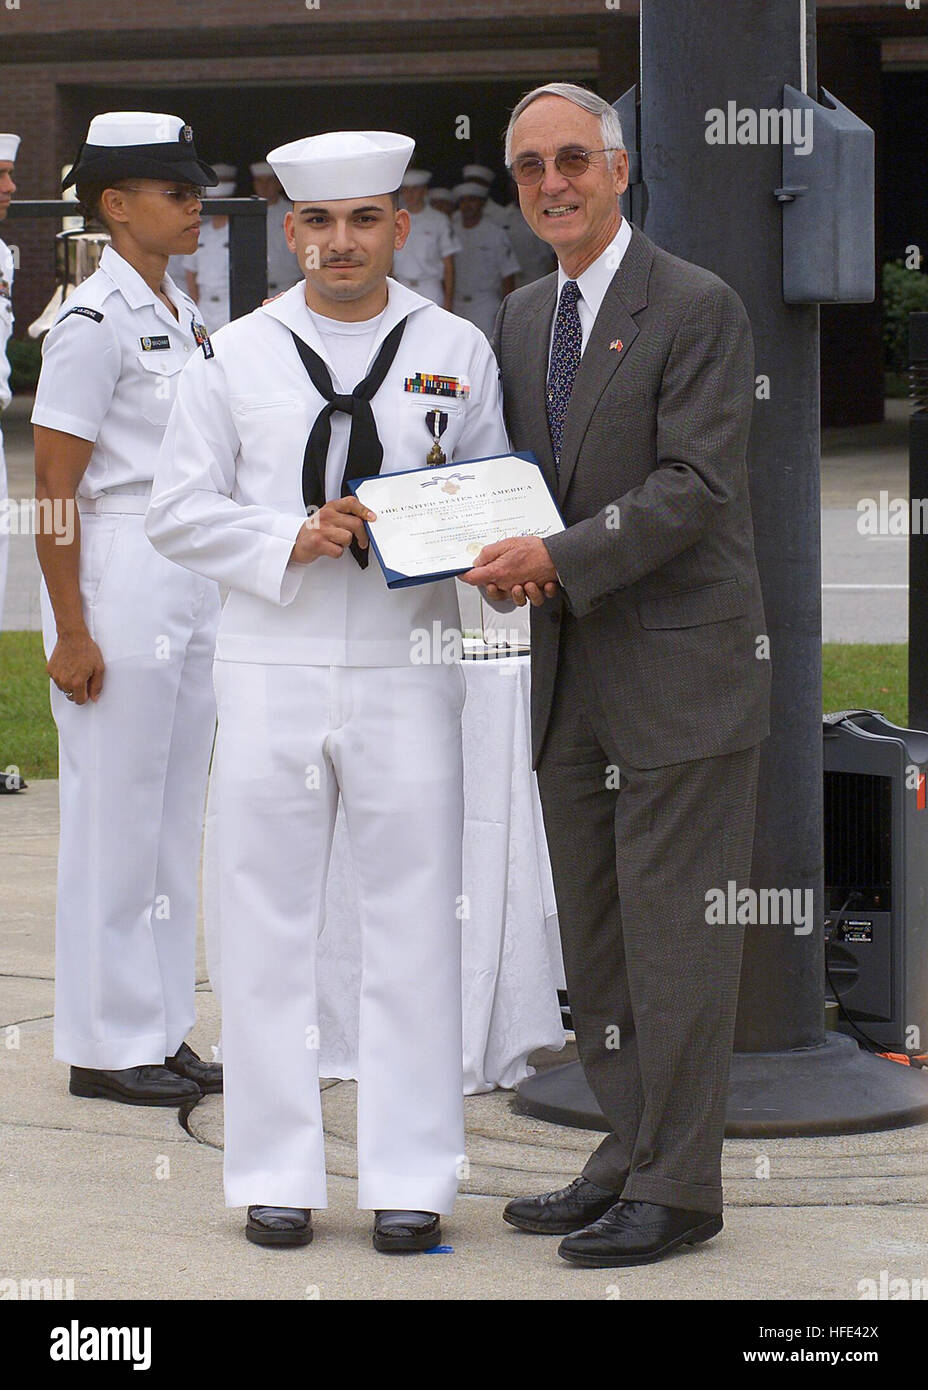 040811-N-0000X-002 Camp Lejeune, N.C. (Aug. 11, 2004) Ð Secretary of the Navy, Gordon R. England presents the Navy Cross to Hospitalman Apprentice Luis E. Fonseca, Jr., for heroism during the battle of An Nasiriyah, Iraq, in March 2003. Under attack and without concern of his own safety, Hospitalman Apprentice Fonseca braved small arms, machine gun, and intense rocket-propelled grenade fire to evacuate wounded Marines from a burning amphibious assault vehicle. He stabilized two casualties with lower limb amputations with tourniquets and administered morphine, while organizing the evacuation of Stock Photo